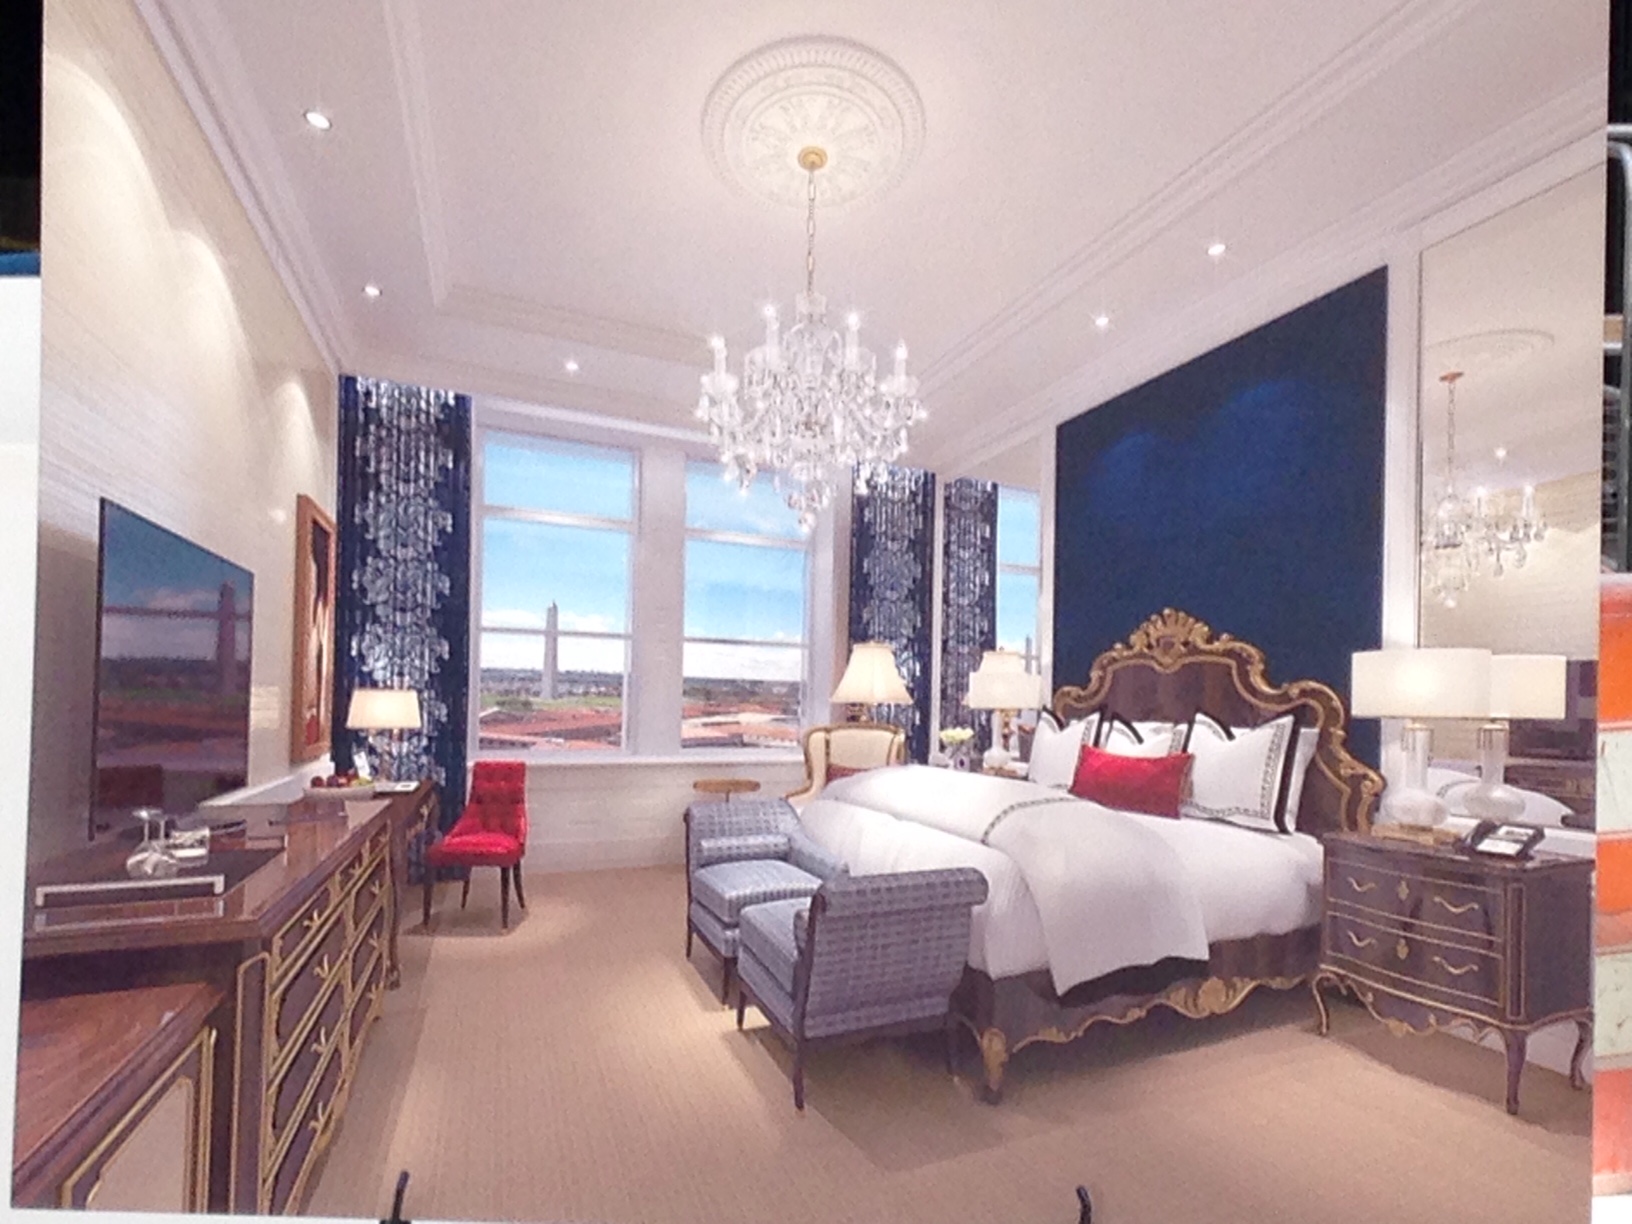 An artist's rendering of one of the luxury suites inside the hotel. The hotel did not make any completed suites available for photos. (WTOP/Megan Cloherty) 